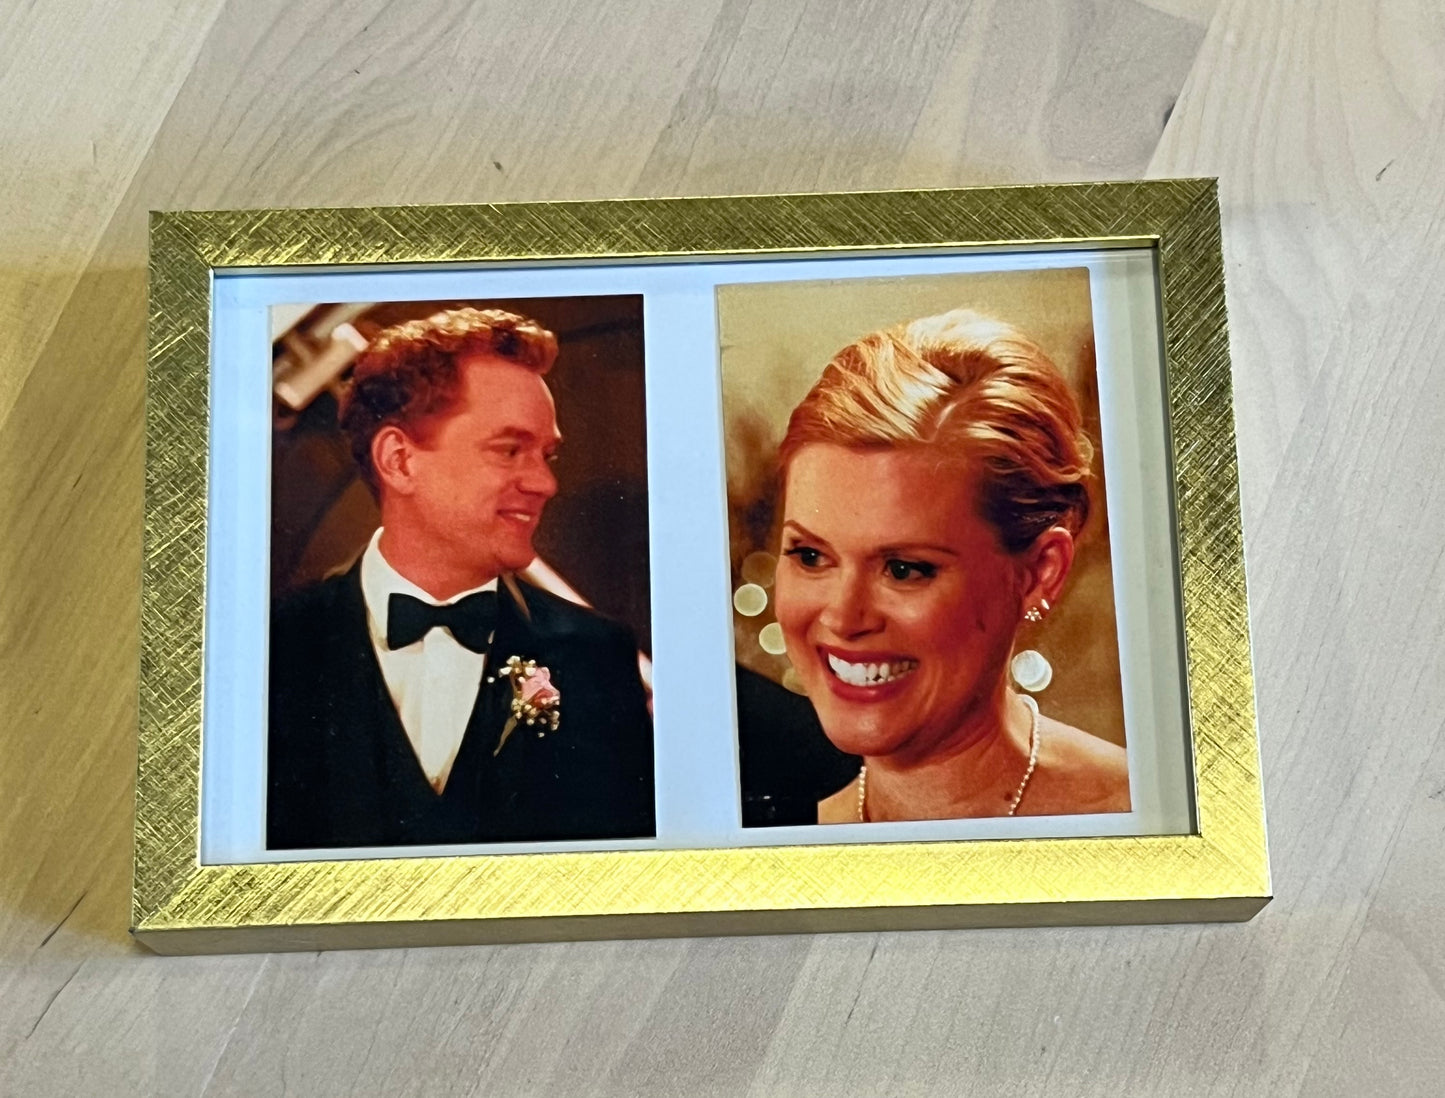 YOU'RE THE WORST: Paul and Lindsey’s Framed Wedding Picture